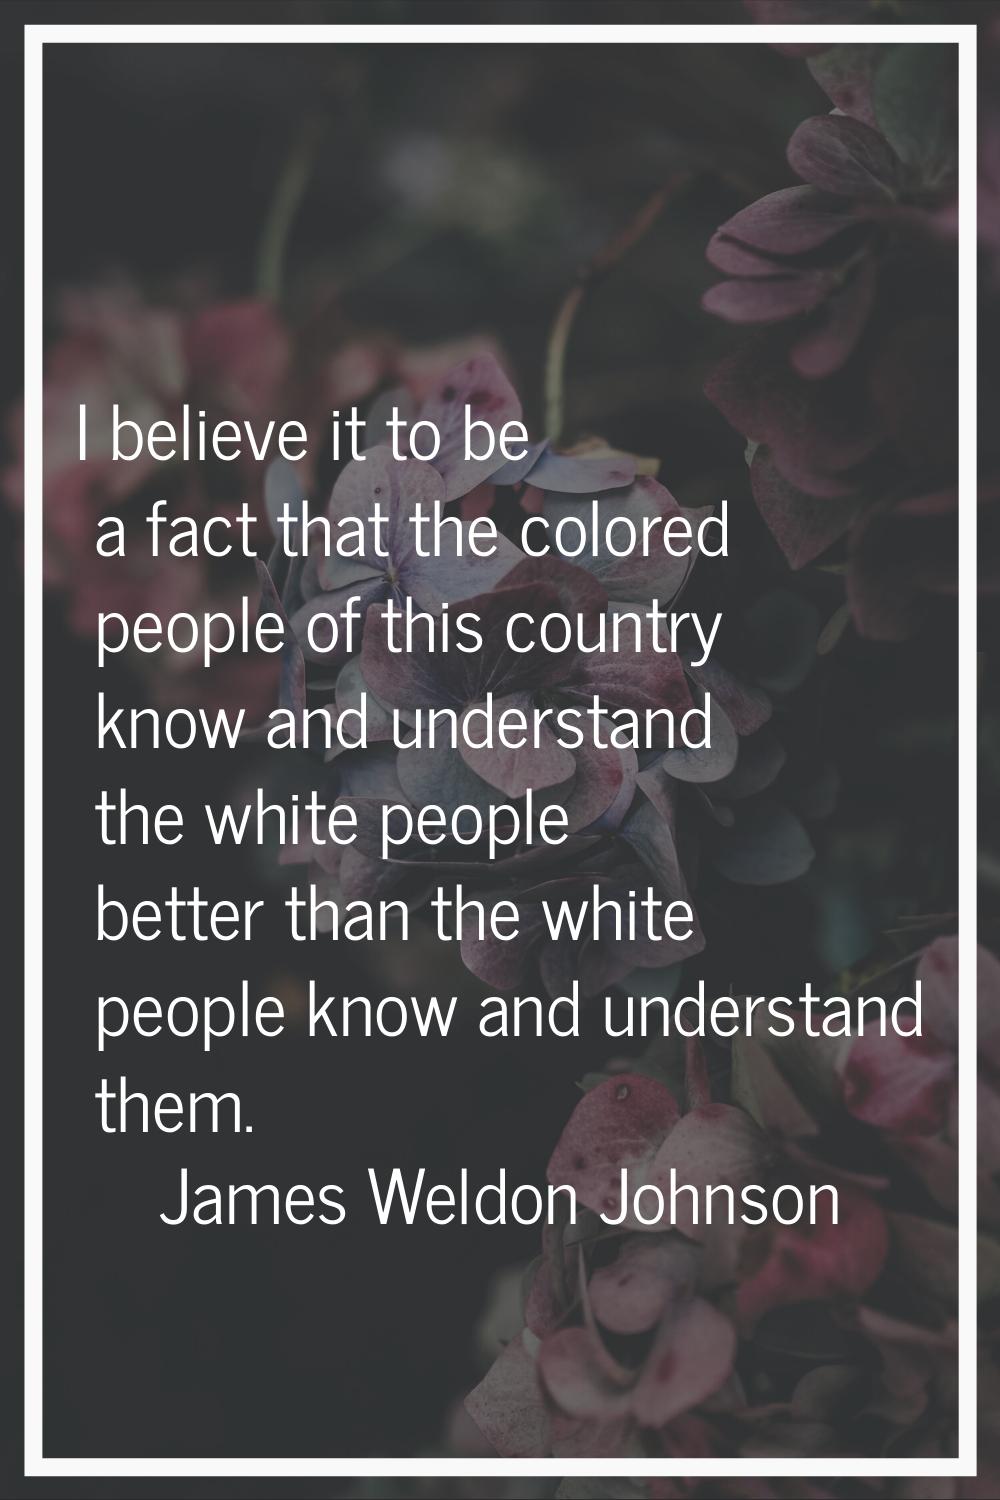 I believe it to be a fact that the colored people of this country know and understand the white peo